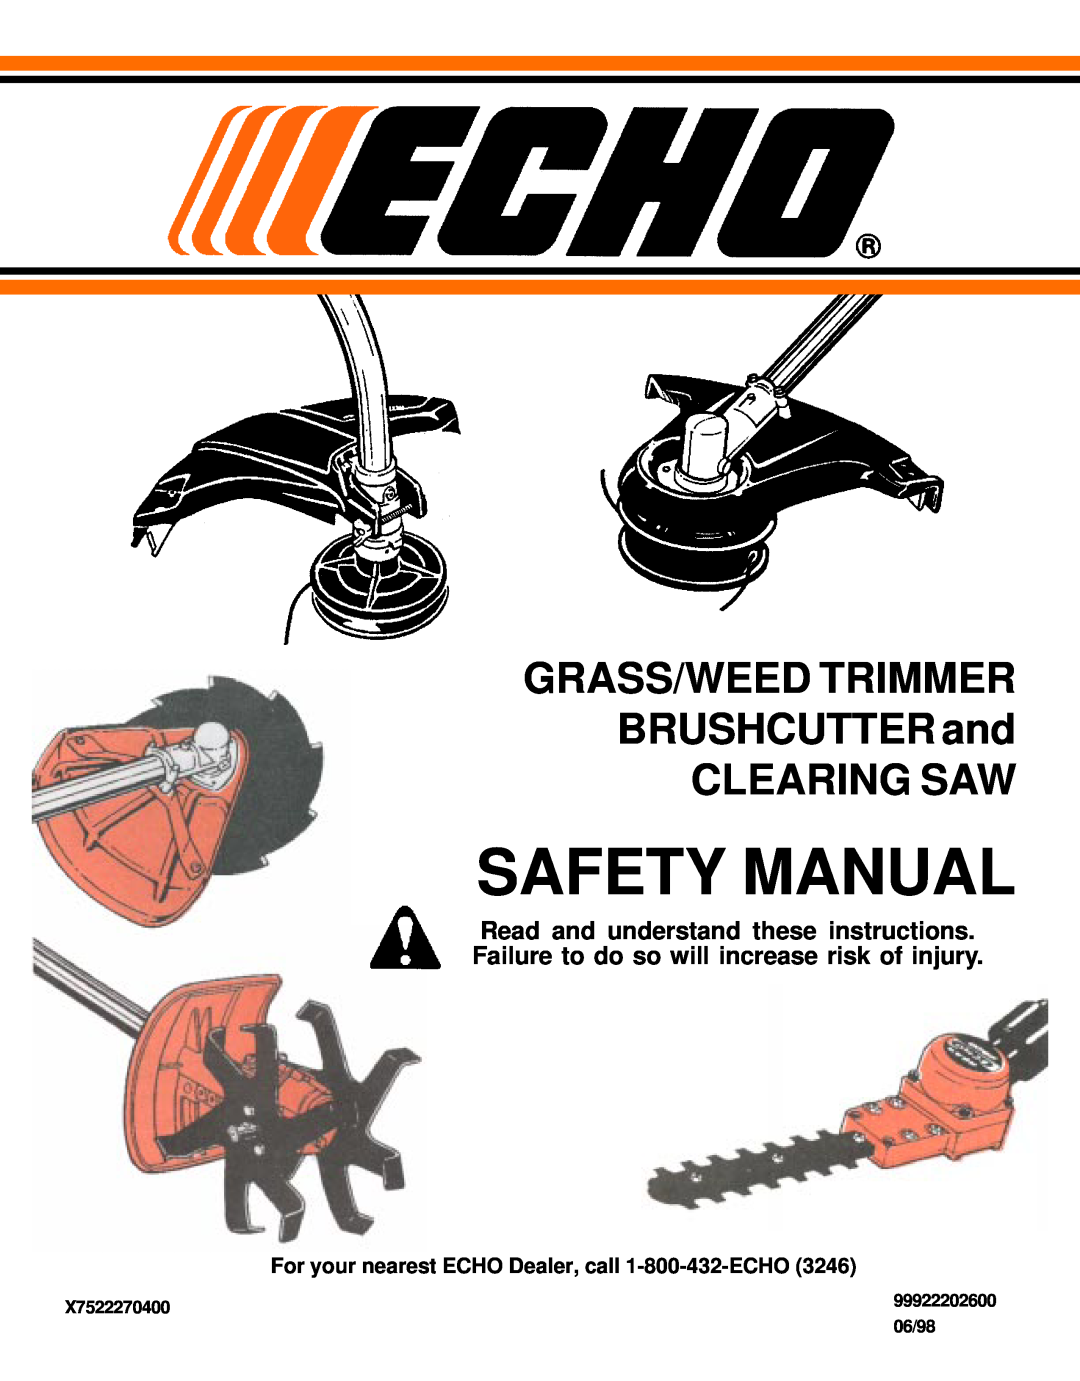 Echo GRASS/WEED TRIMMER BRUSHCUTTER and CLEARING SAW manual Read and understand these instructions, Safety Manual, 06/98 